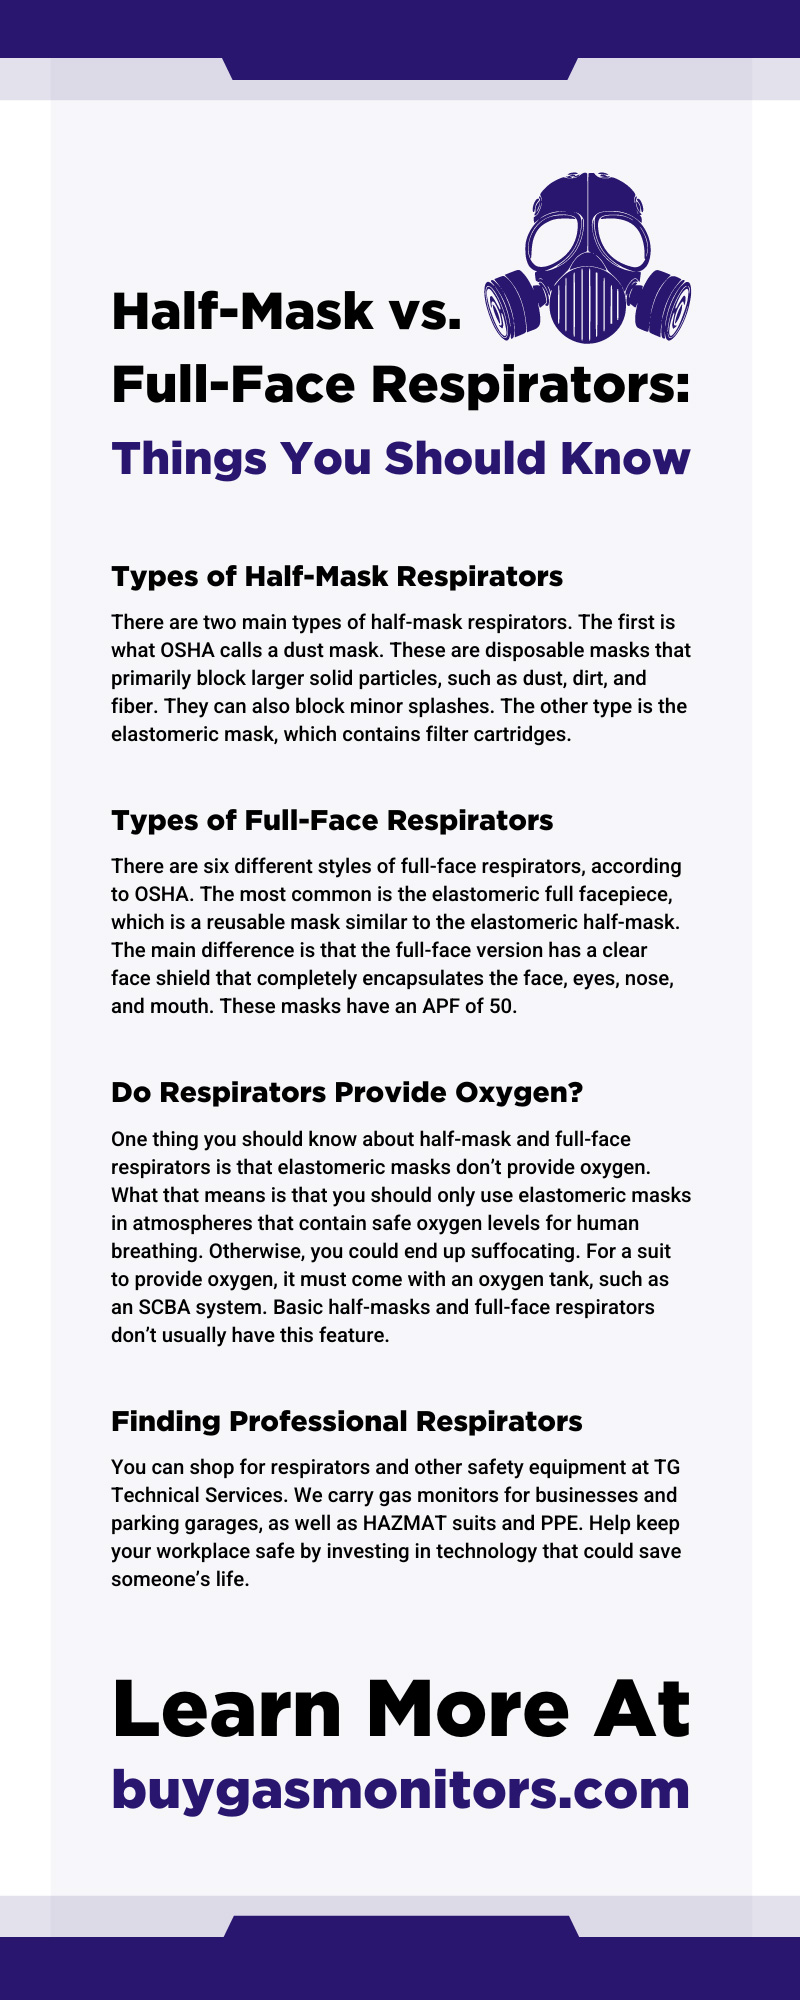 Half-Mask vs. Full-Face Respirators: Things You Should Know